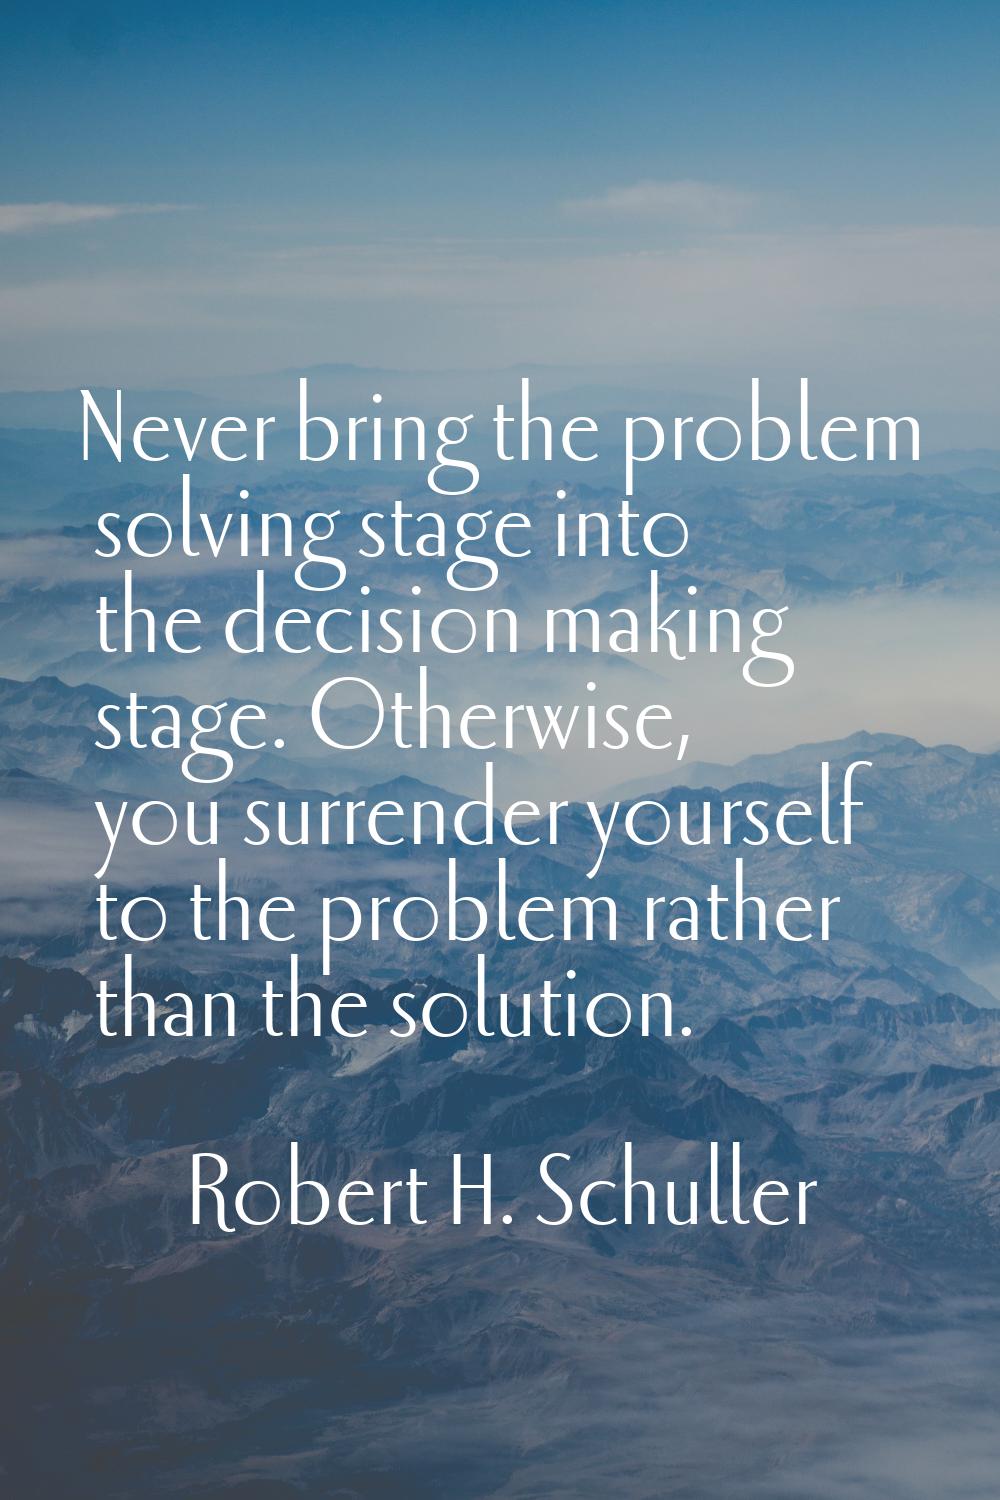 Never bring the problem solving stage into the decision making stage. Otherwise, you surrender your